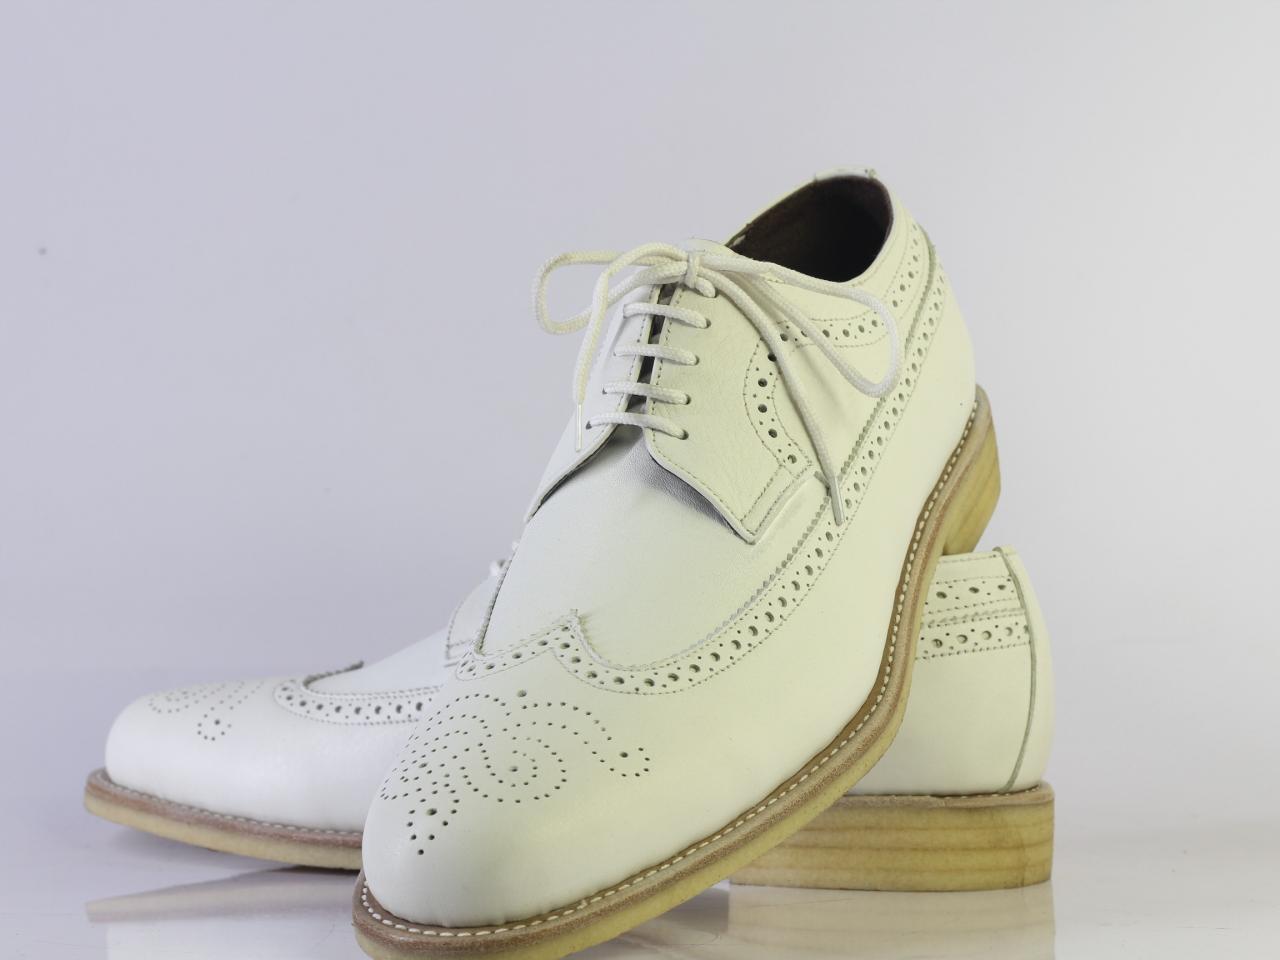 Men's Handmade Genuine Leather White Wingtip Brogue Shoes With Crepe Sole Custom Made Wingtip Oxford Shoes Men's White Leather